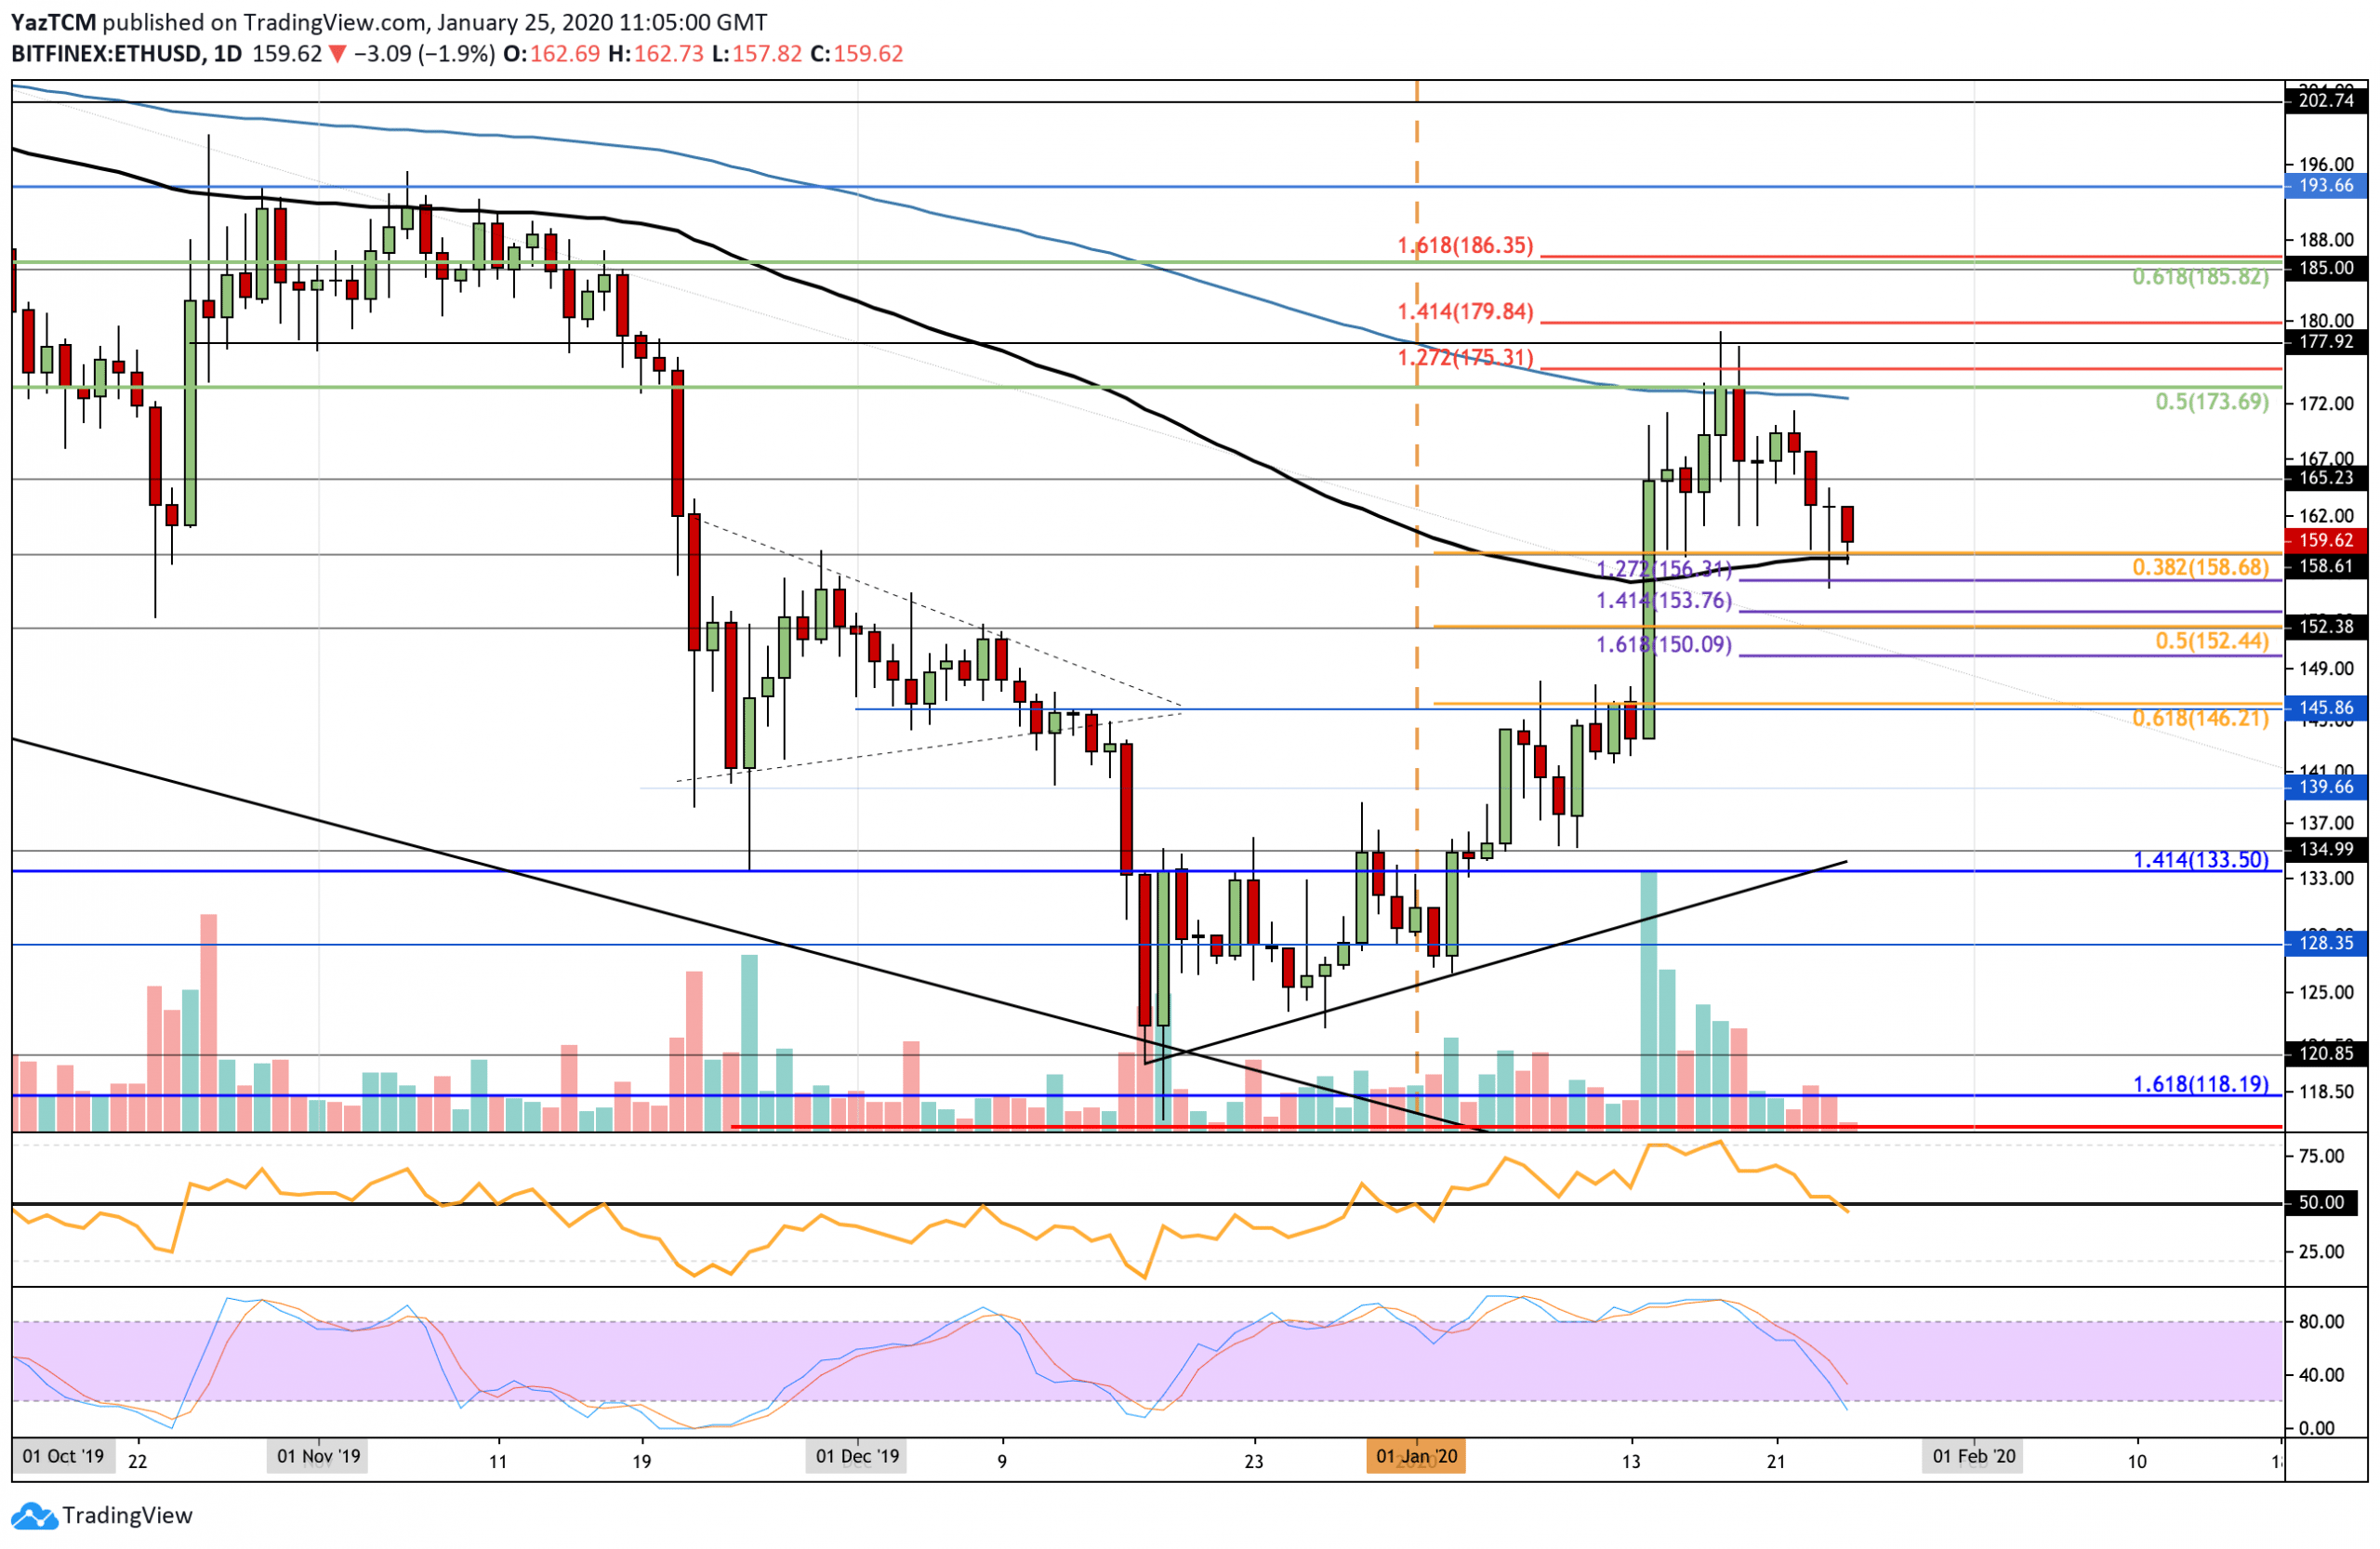 Ethereum Price Analysis: ETH Testing Critical Support Below $160, Will It Hold?